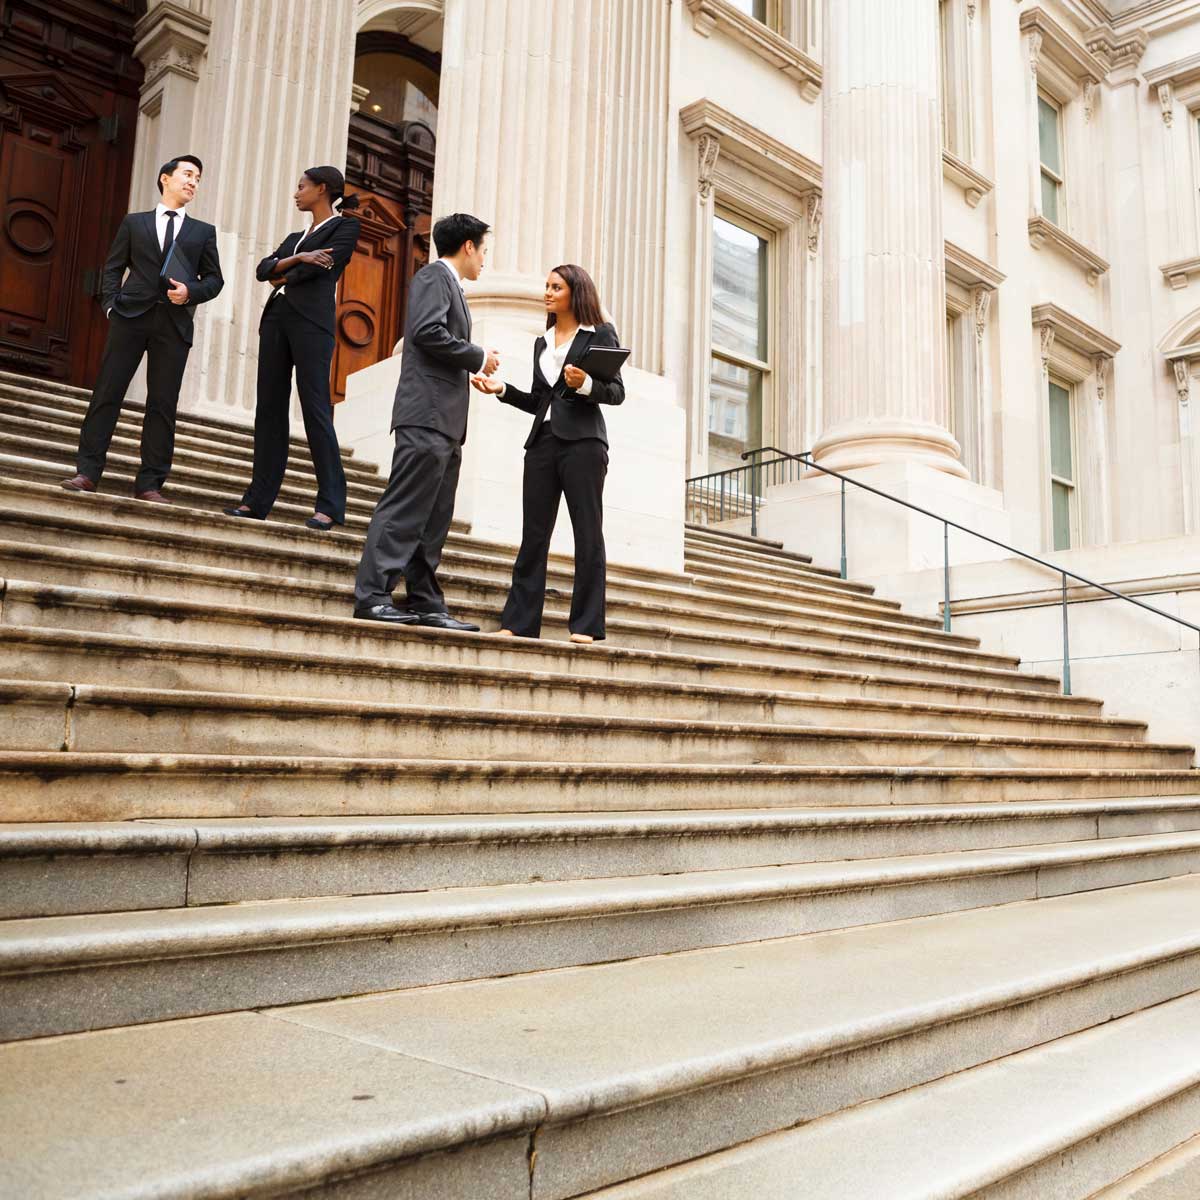 government-professionals-in-discussion-on-the-exterior-steps-of-a-U.S.-government-building